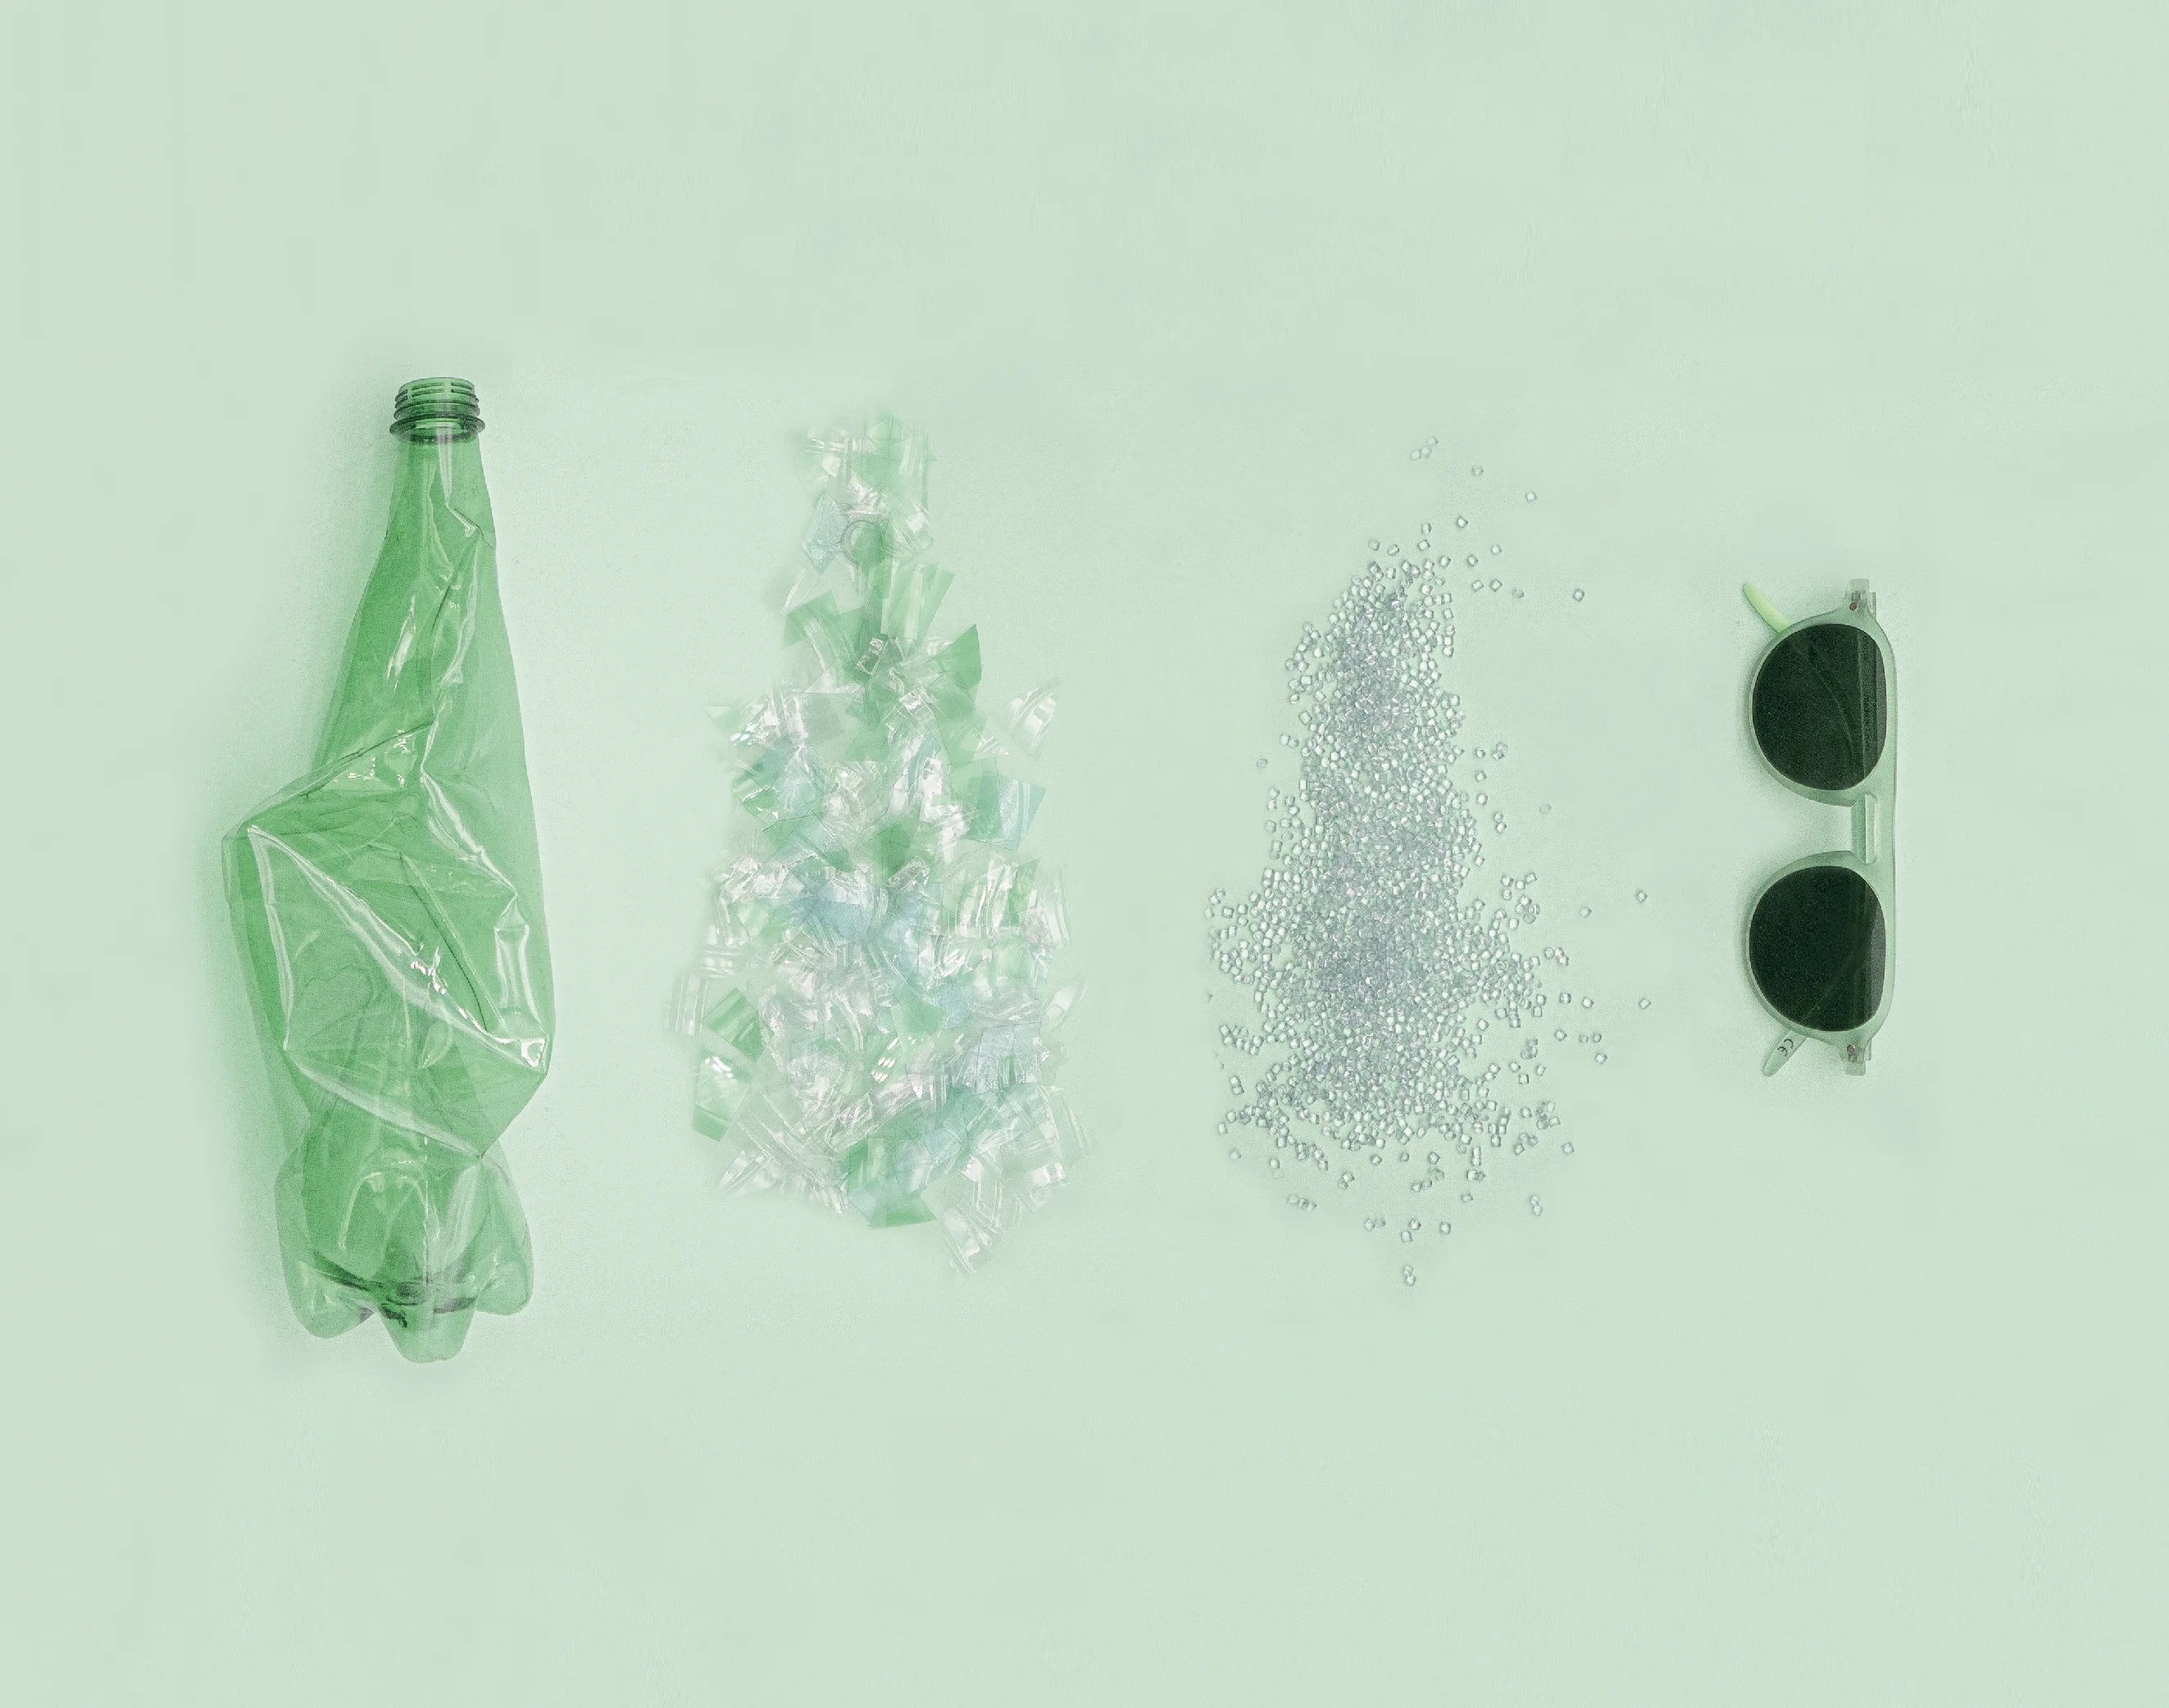 Photograph of an INFINITY frame depicting the plastic transformation process used in its manufacturing. From left to right, there is a green transparent plastic bottle, plastic bottle scraps, plastic granules, and the INFINITY frame.